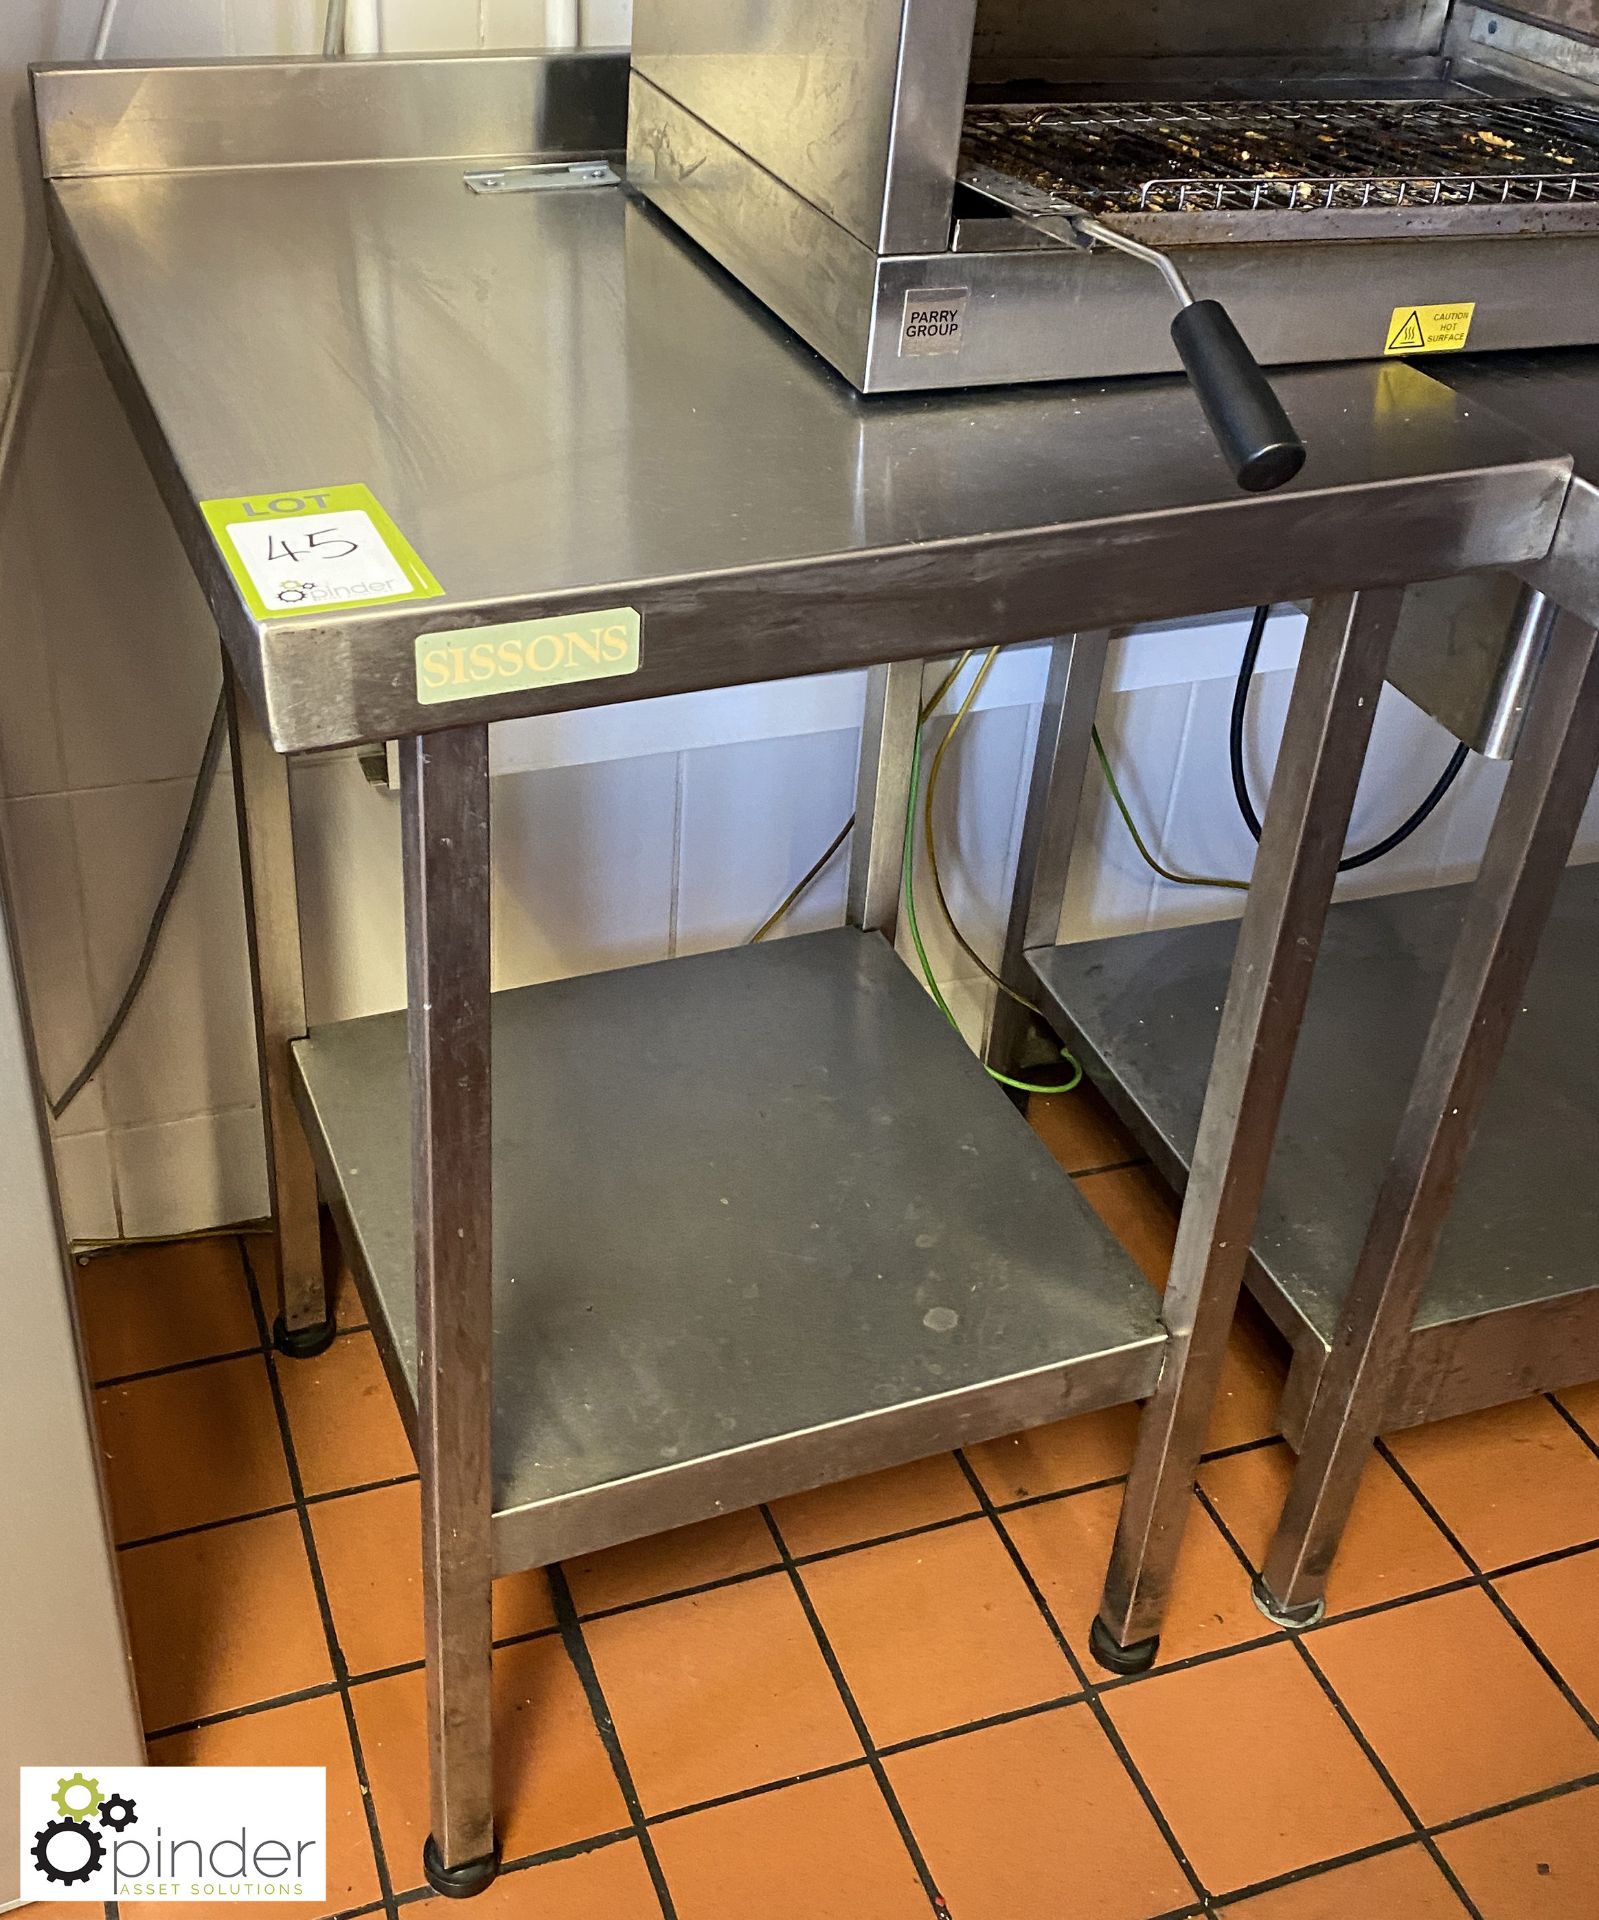 Stainless steel Preparation Table, 600mm x 600mm x 850mm, with under shelf and splash back - Image 2 of 3